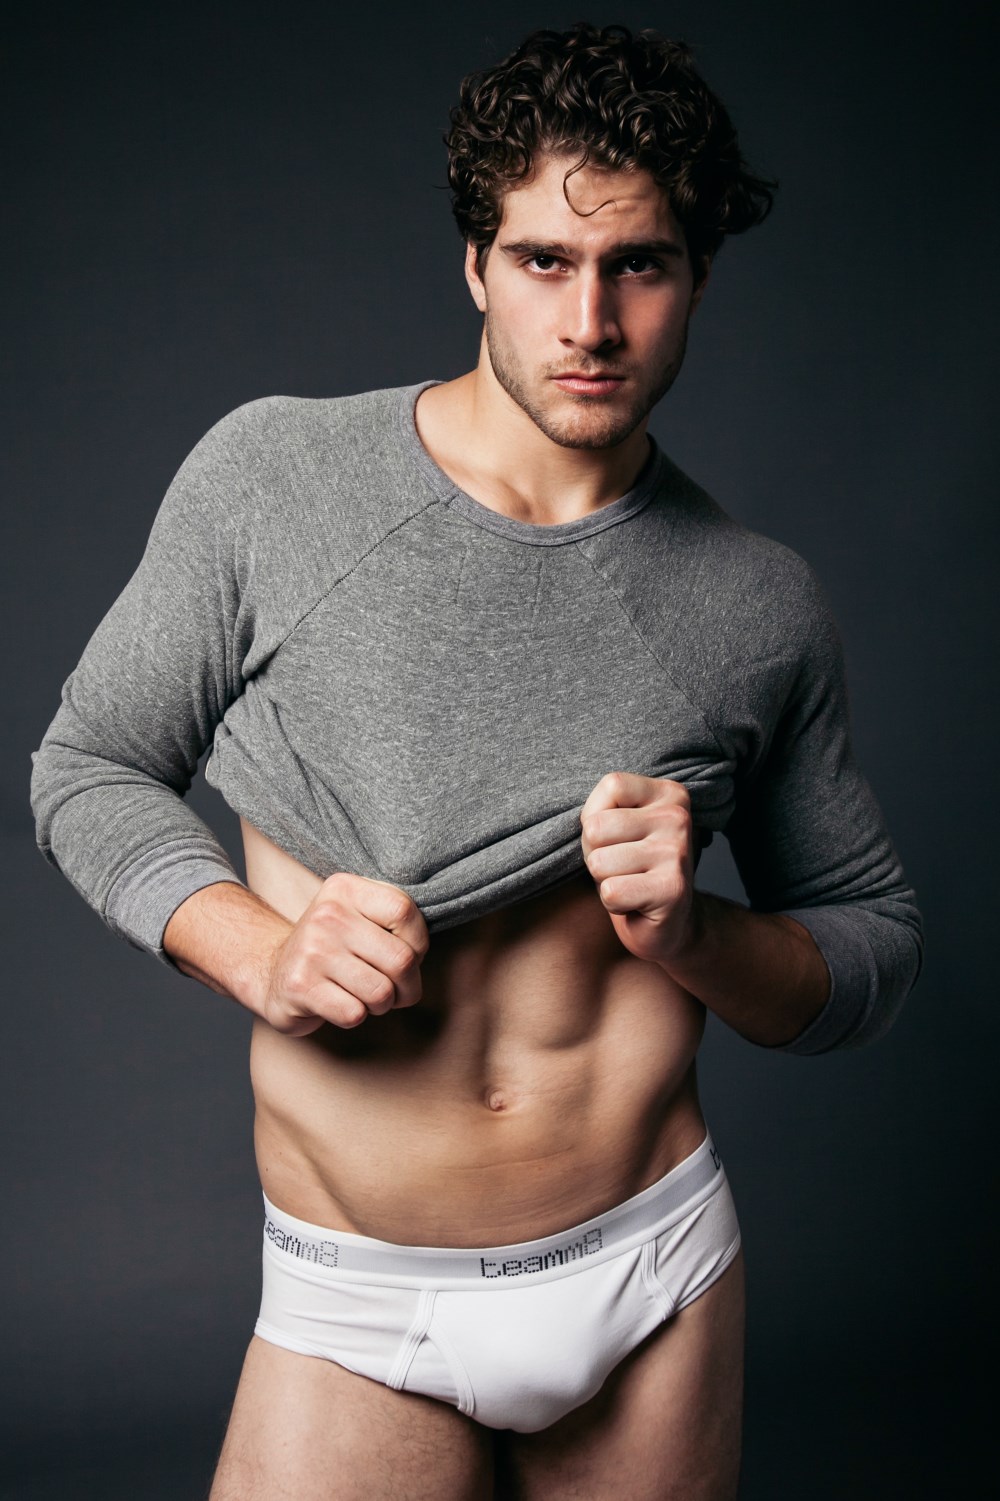 Keith Milkie, male model, photographed by Erik Carter.